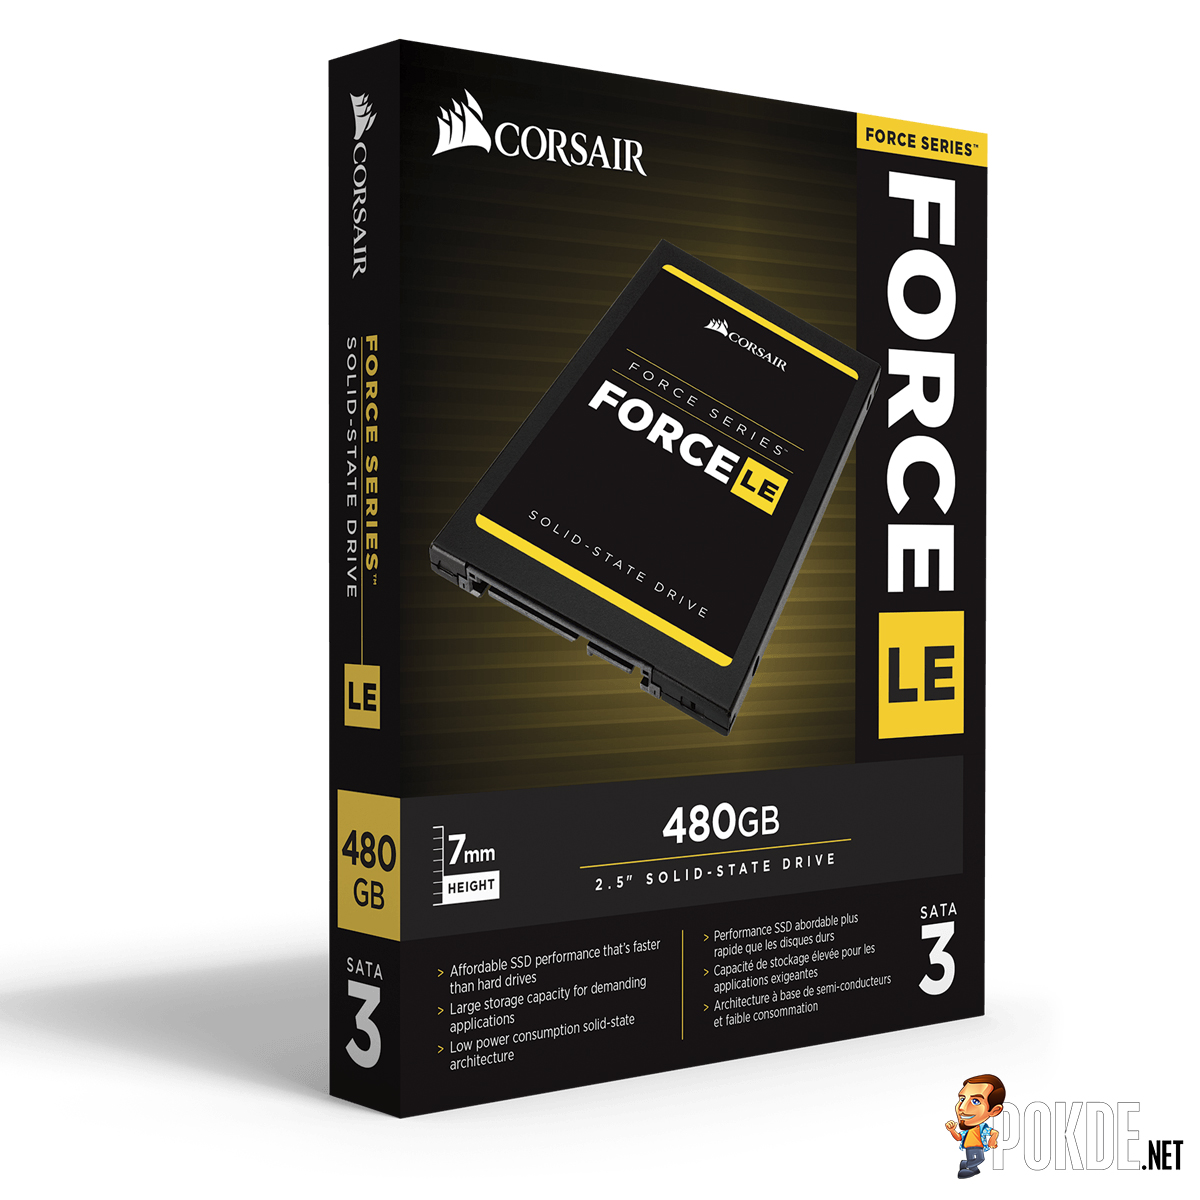 Corsair Force LE SSD is now available in Malaysia 38